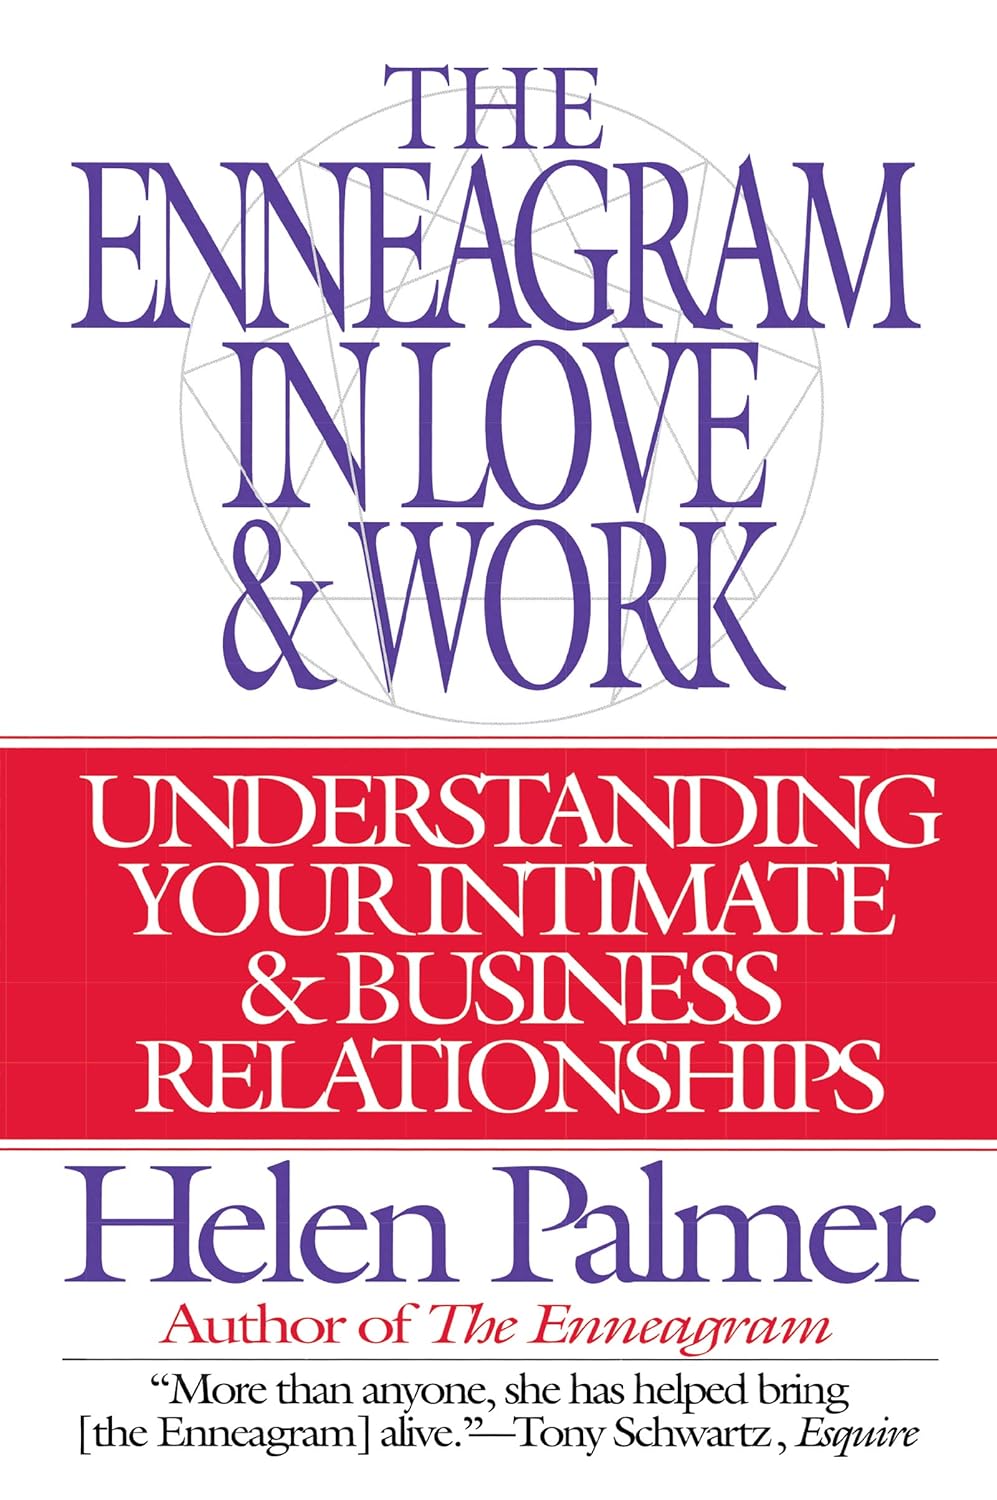 books about enneagram4